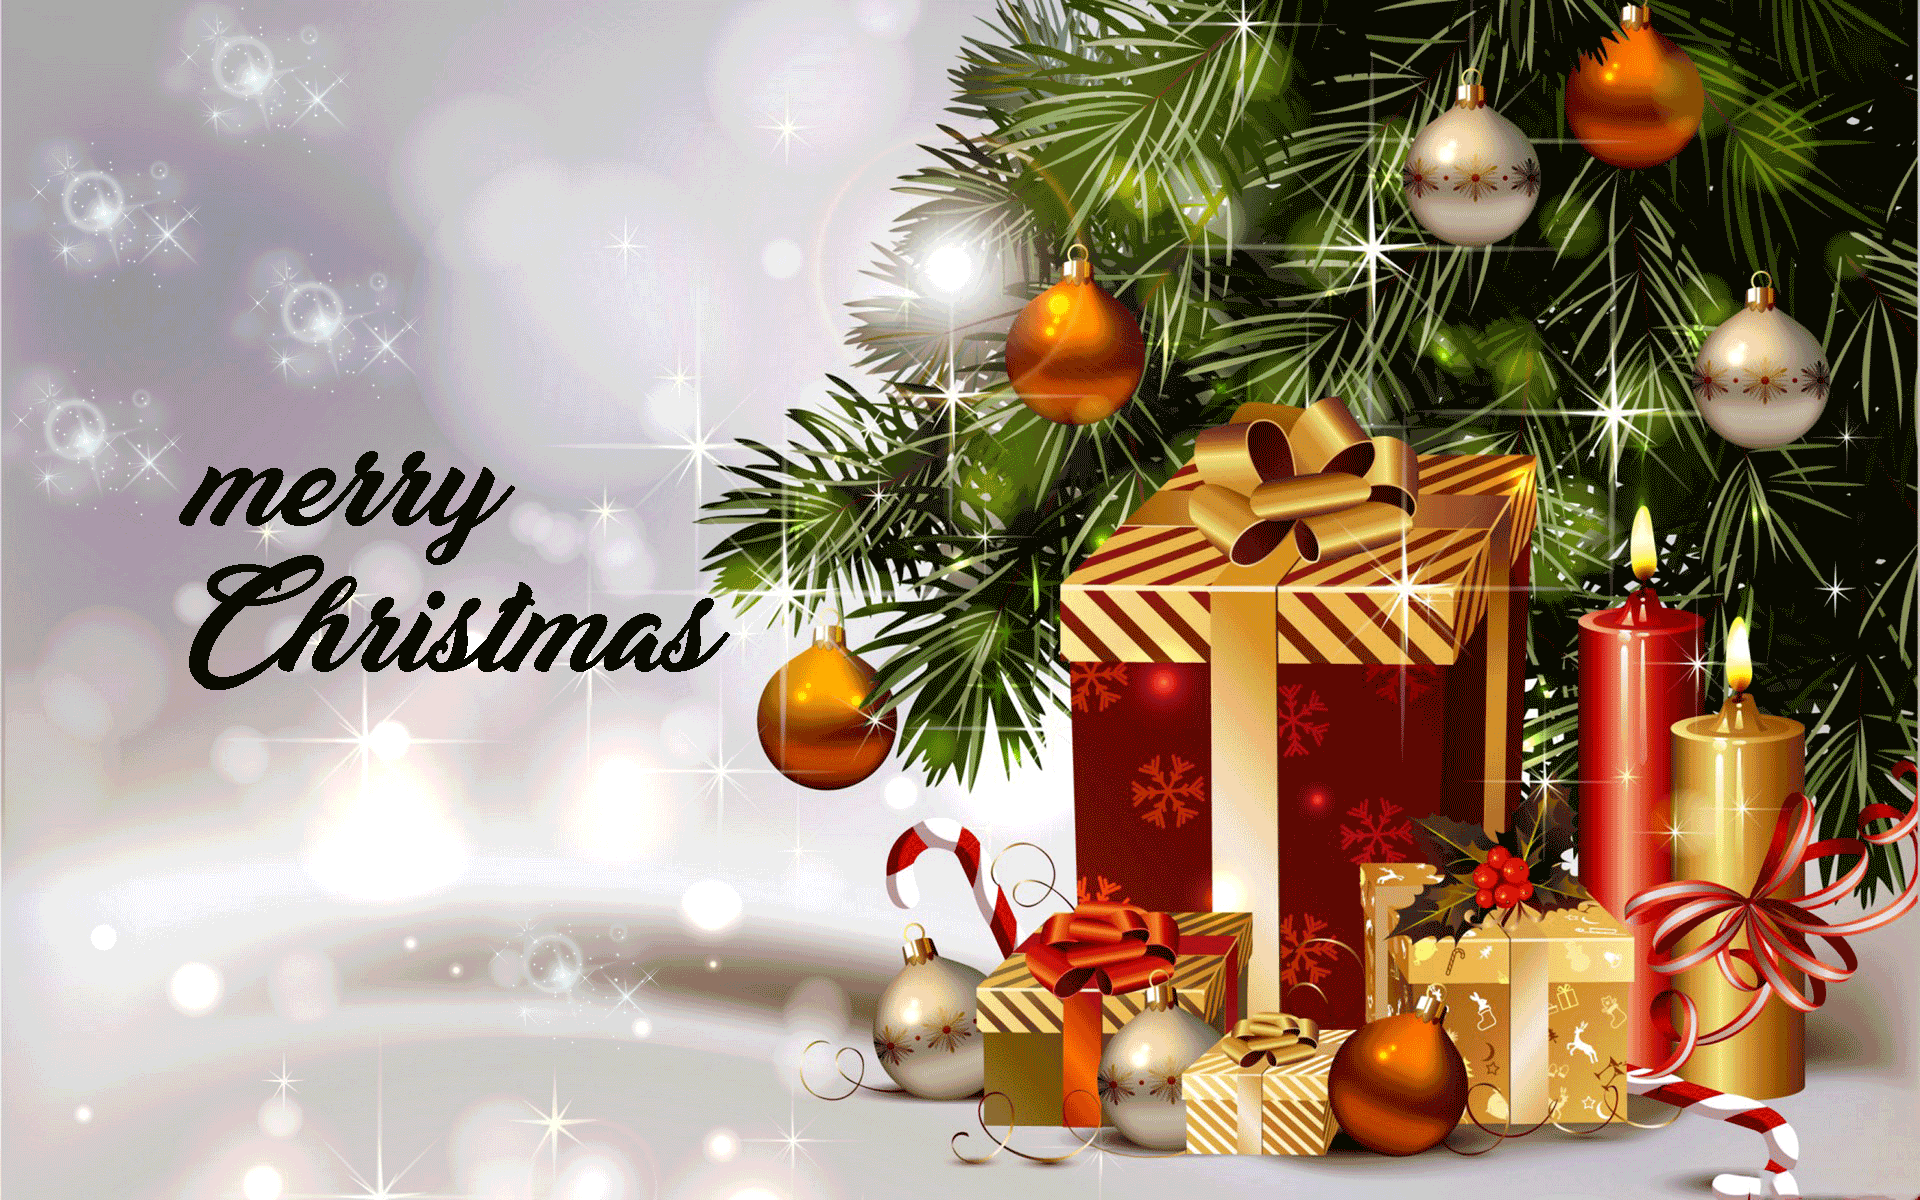 merry-christmas-wallpapers-cards-images